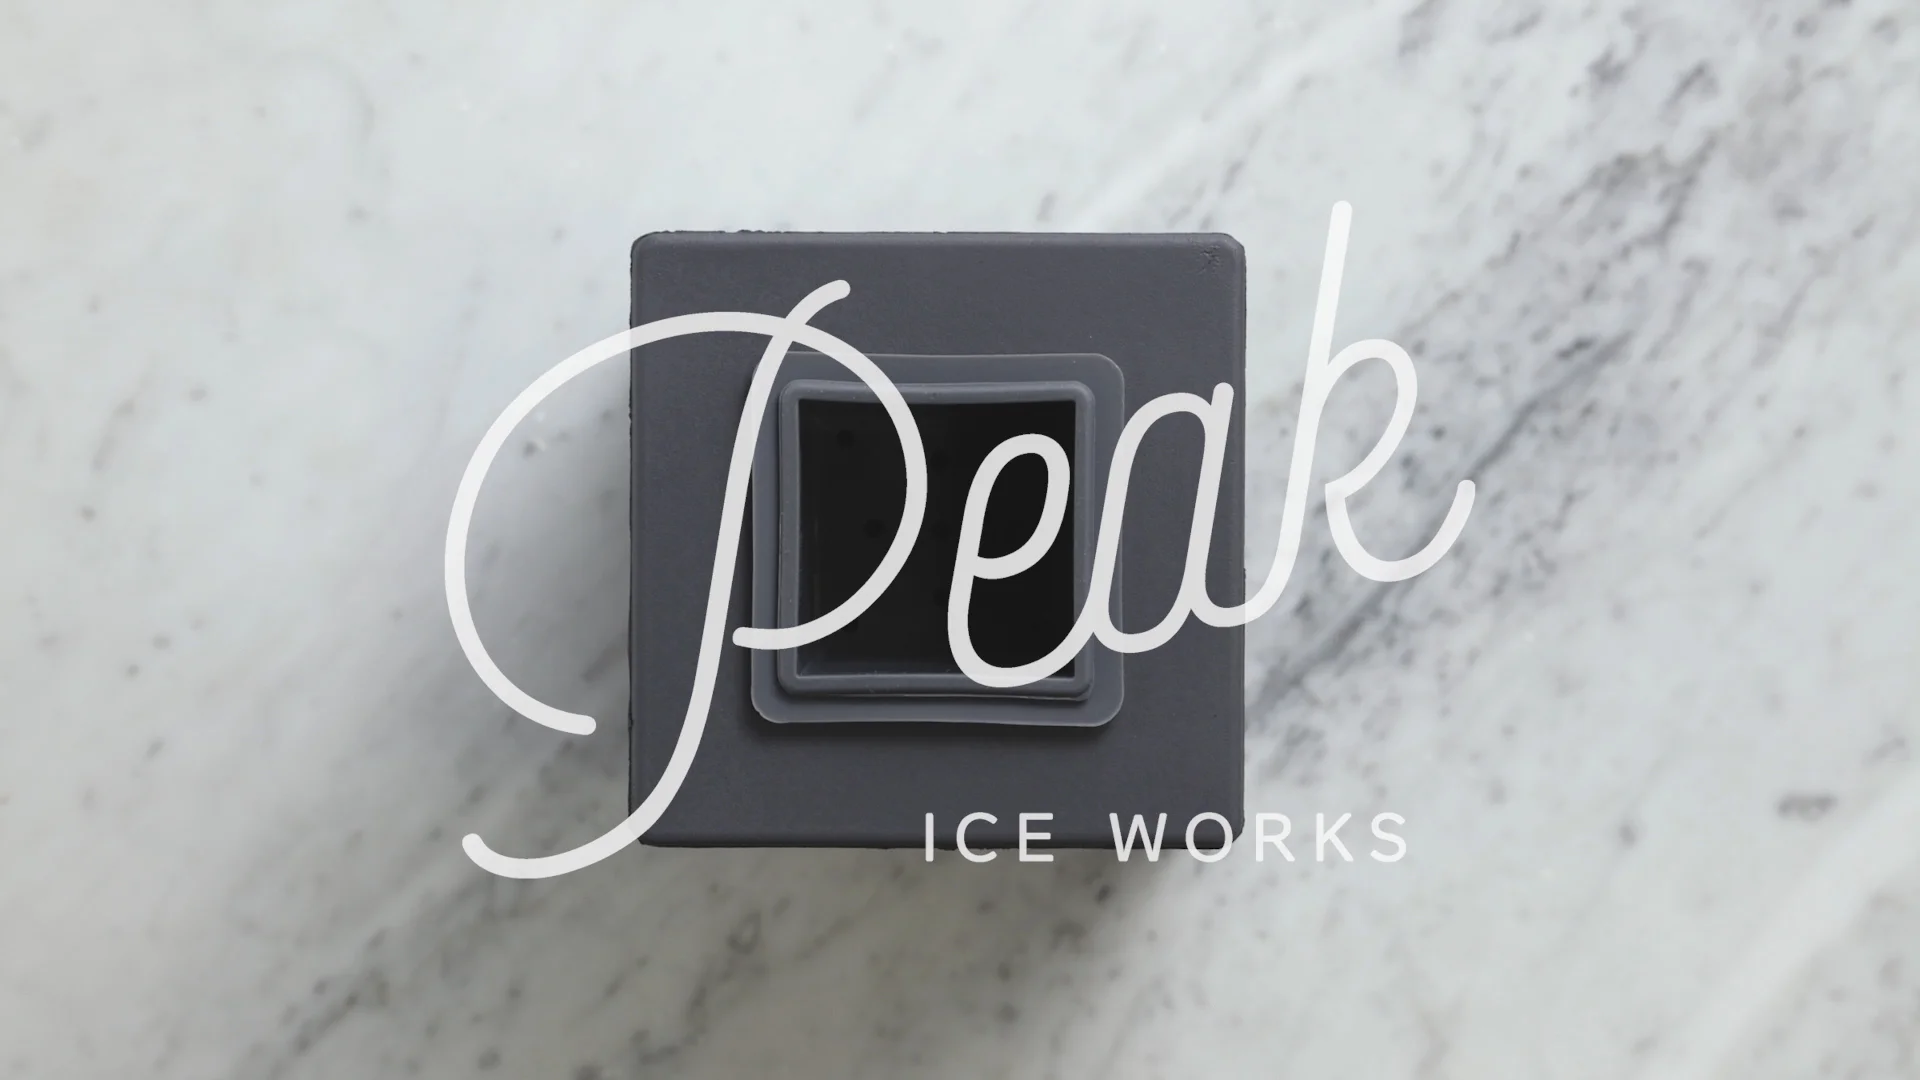 W&P Clear Ice Mold